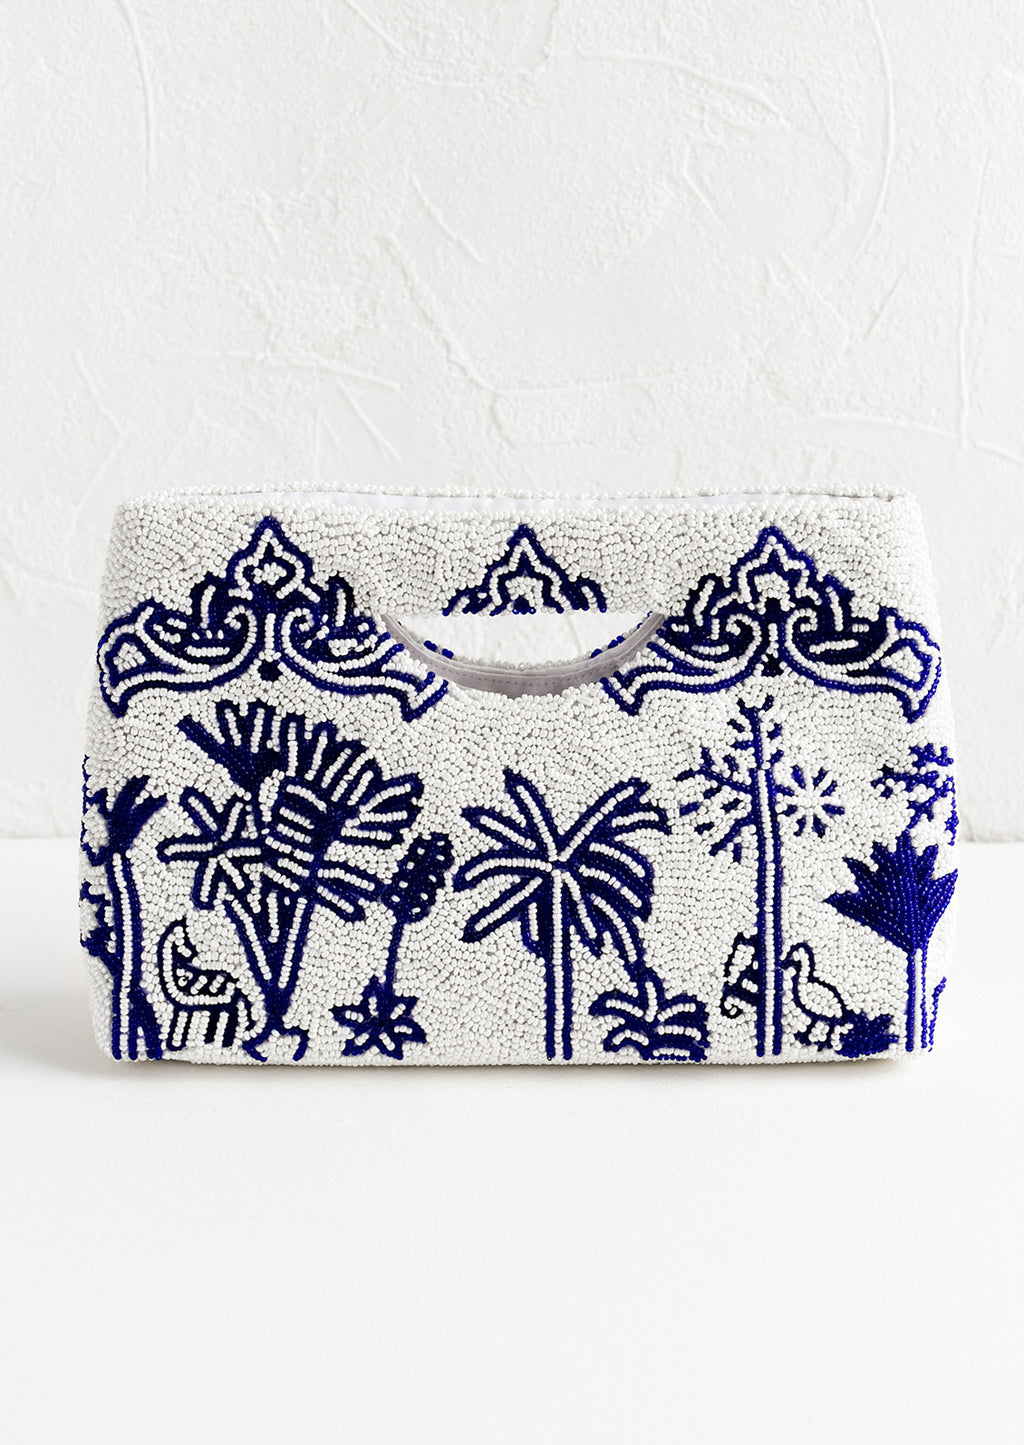 1: A white and blue beaded clutch.